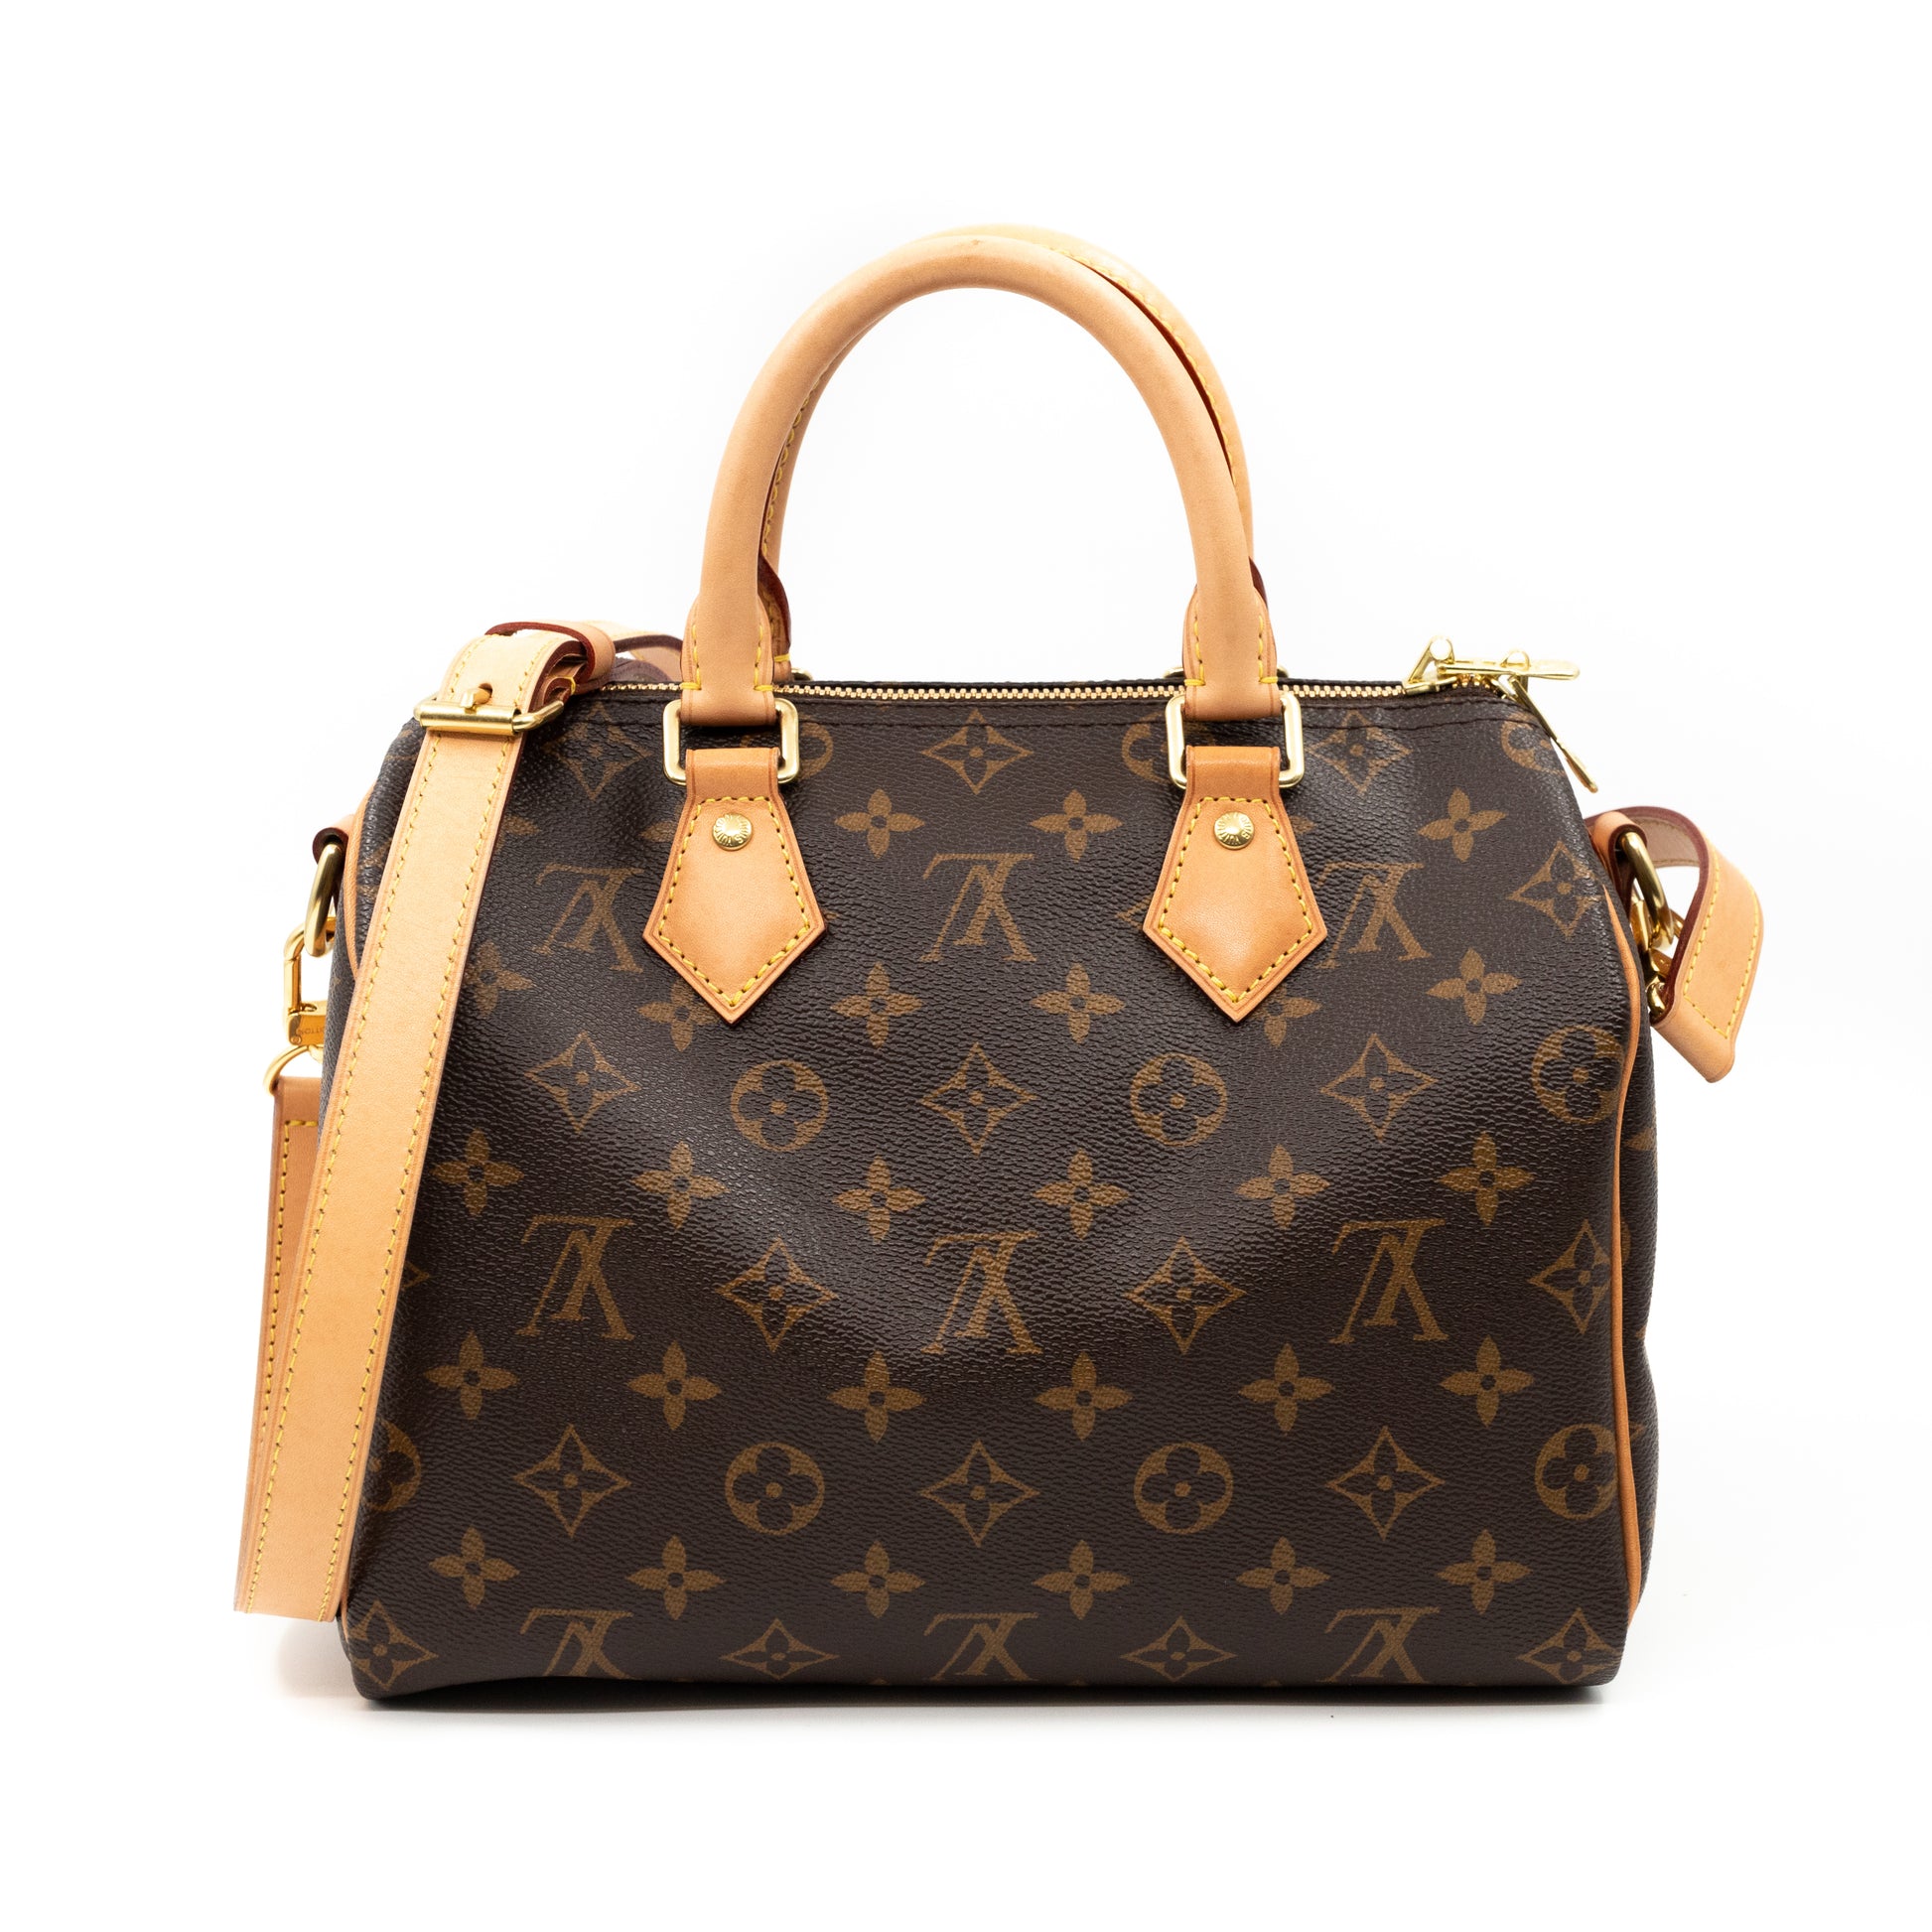 LOUIS VUITTON SPEEDY 25 BANDOULIERE UPDATED REVIEW